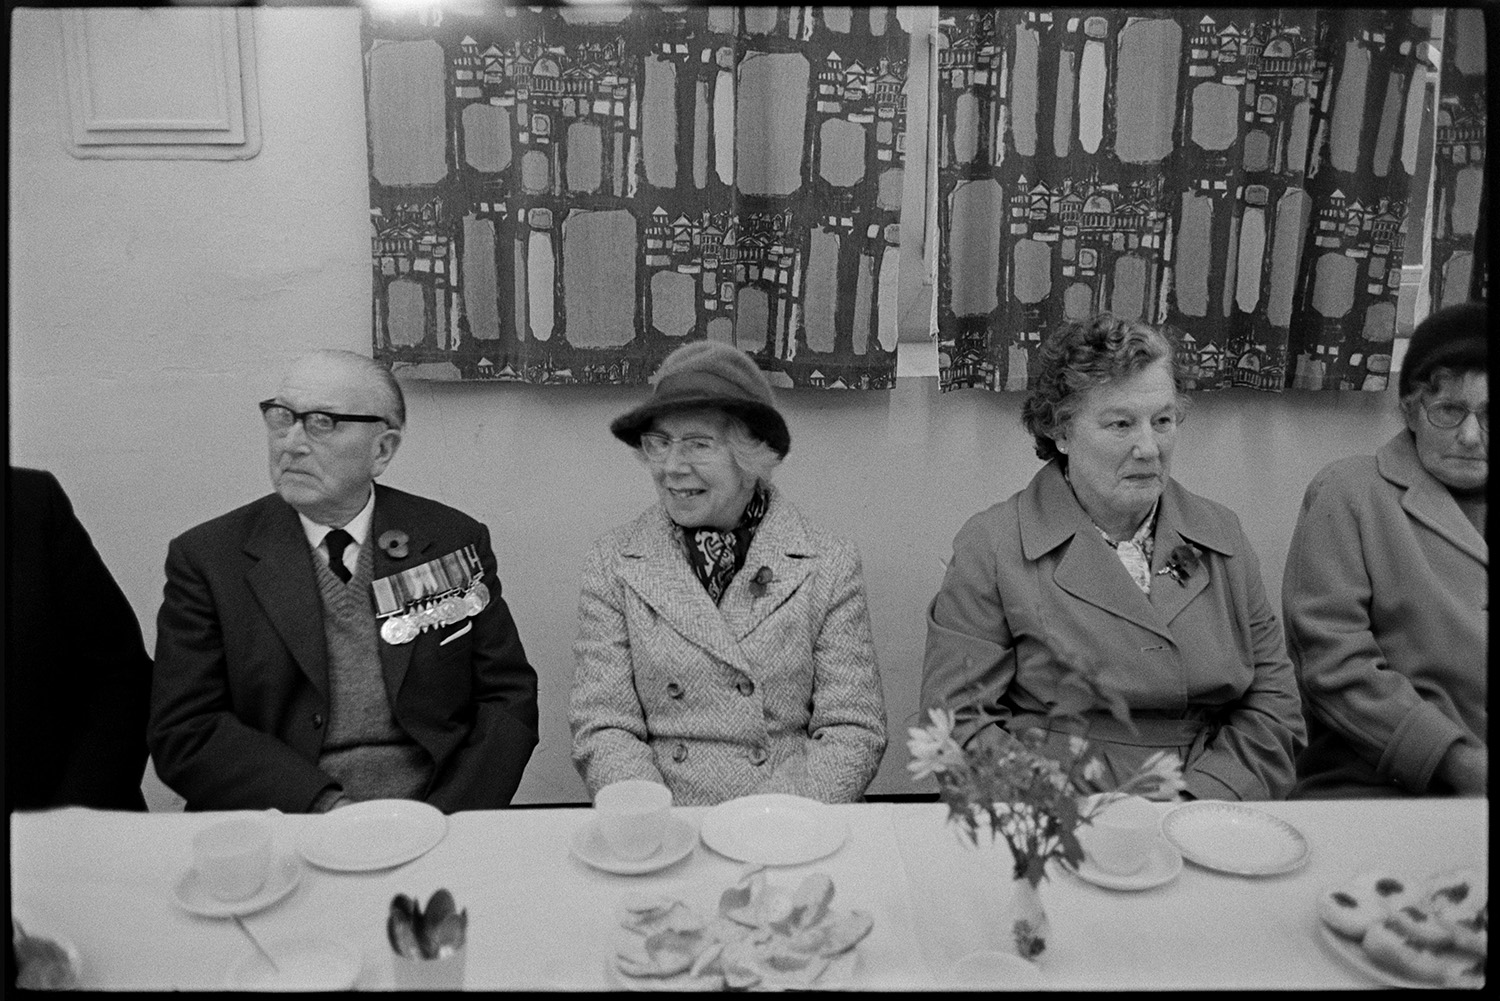 Tea in village hall after Armistice Day parade. 
[A man and three women sat at a table in Winkleigh Village Hall for a tea after the Remembrance Day parade. The table is laid with plates of cakes and the man is wearing military medals on his jacket.]